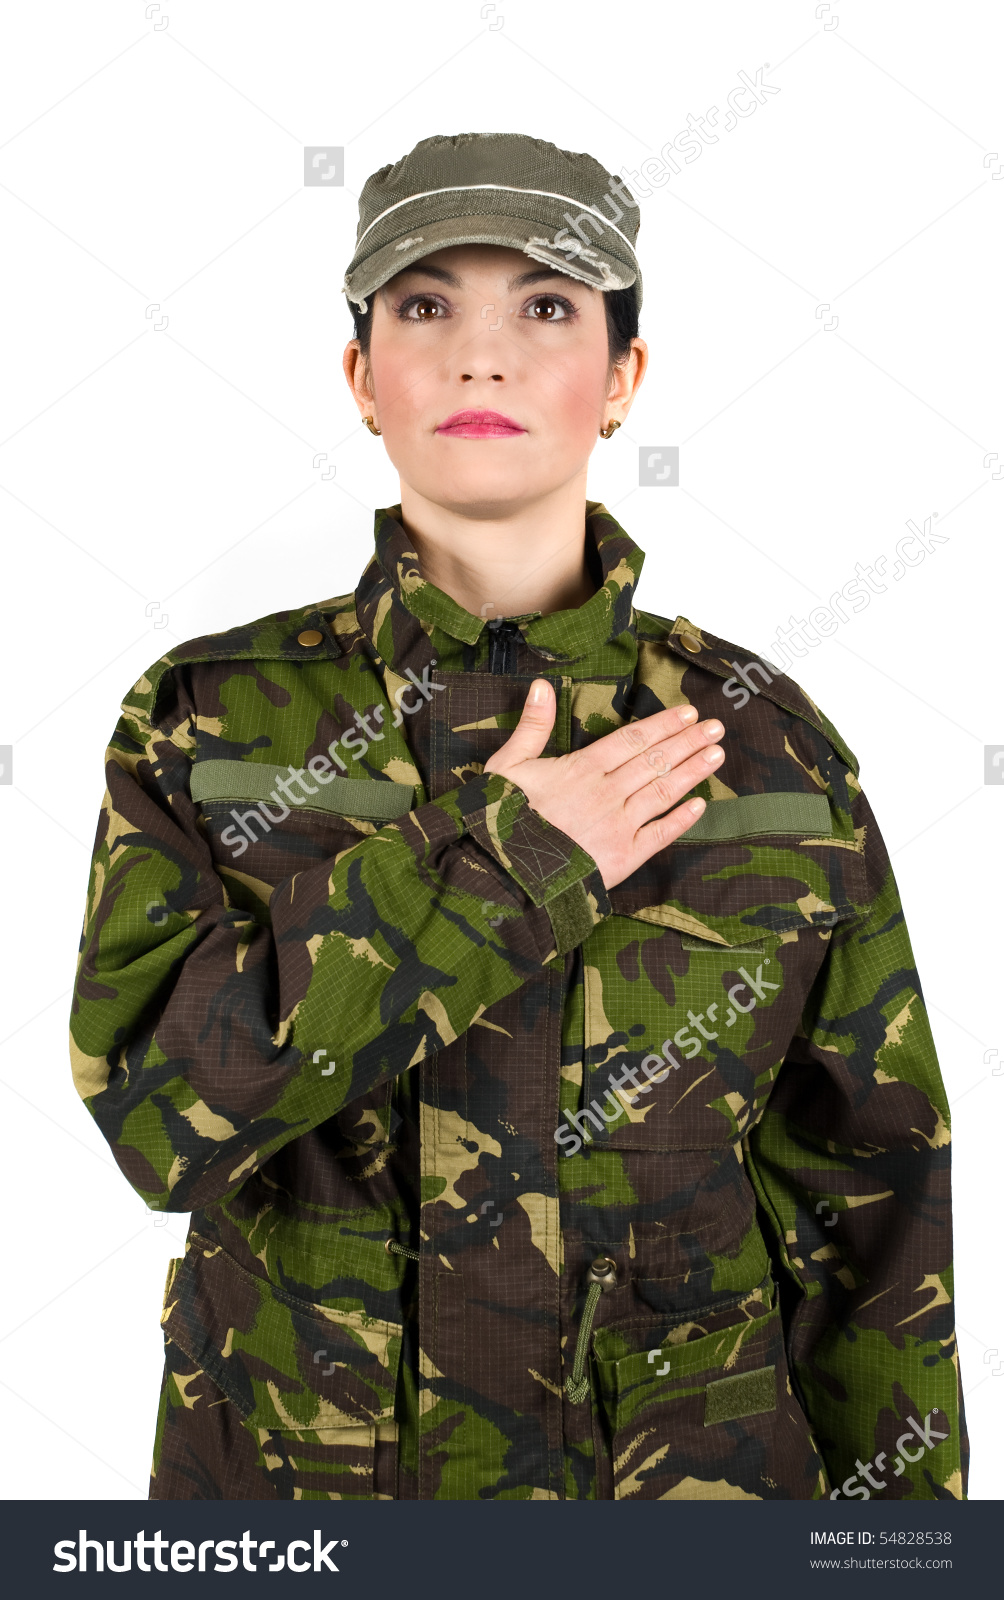 Army Soldier Swear Solemnly Hand On Stock Photo 54828538.